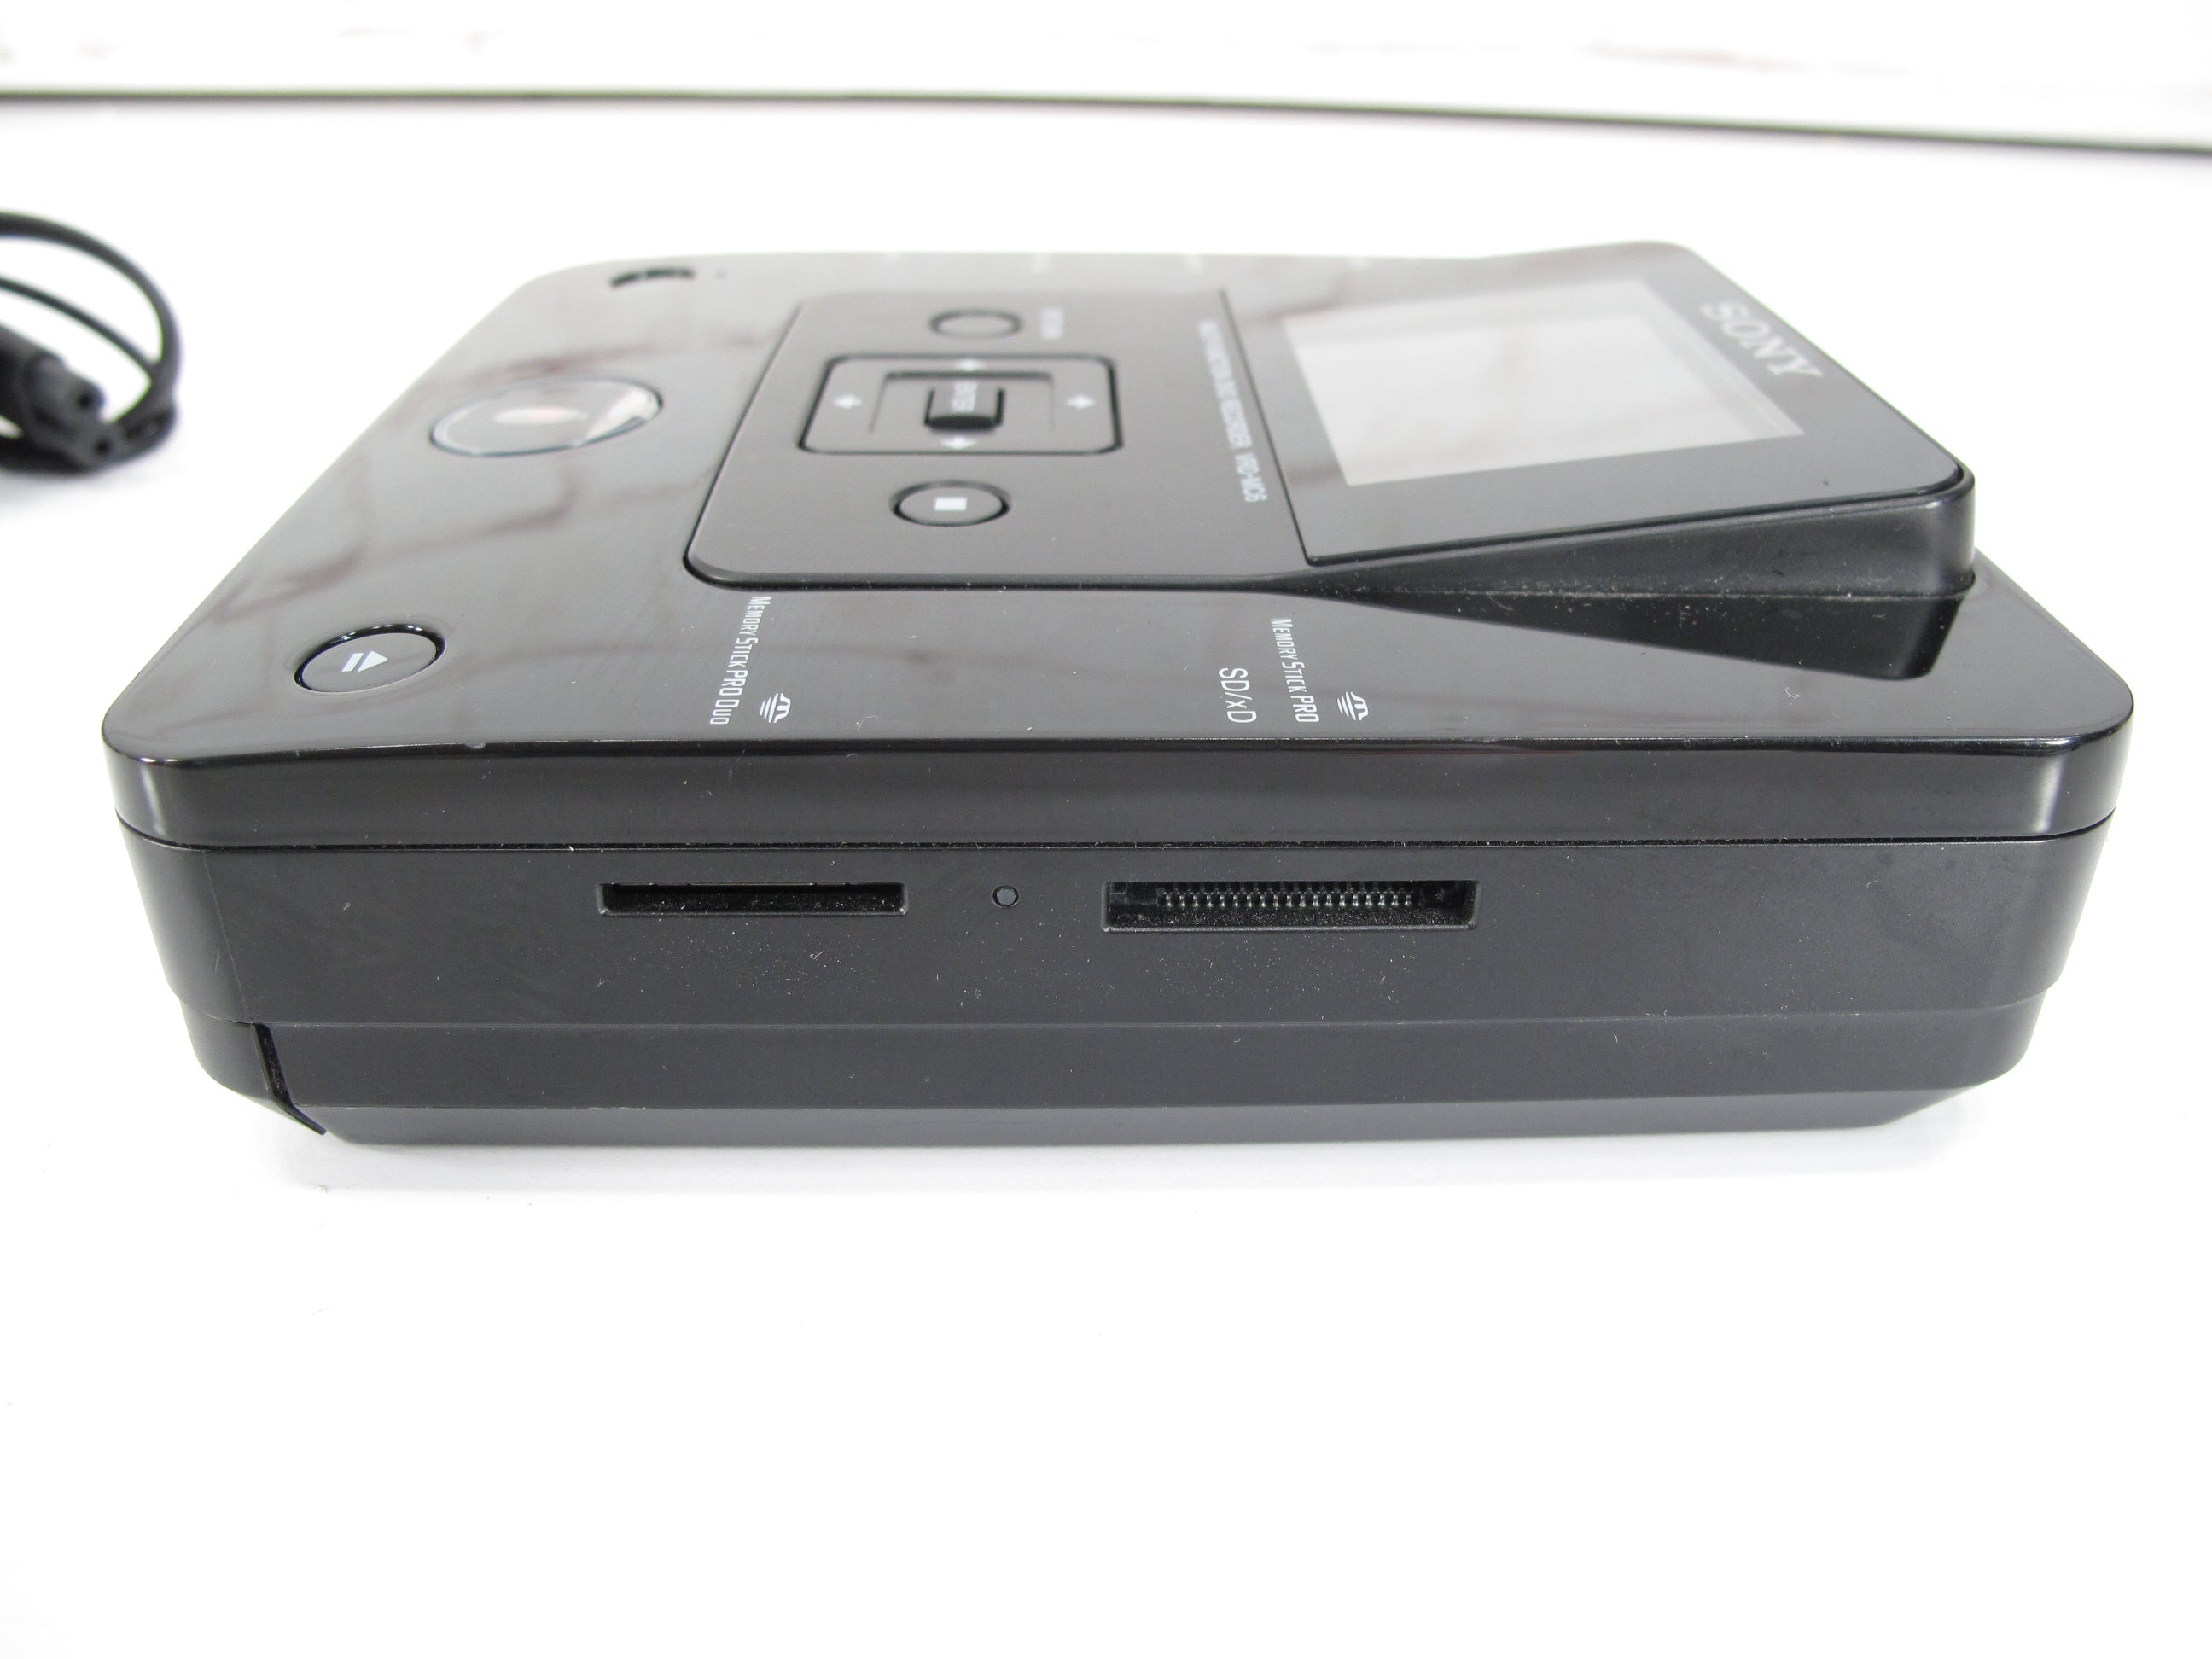 Sony VRD-MC6 Multi-function DVD Recorder, Record Straight From